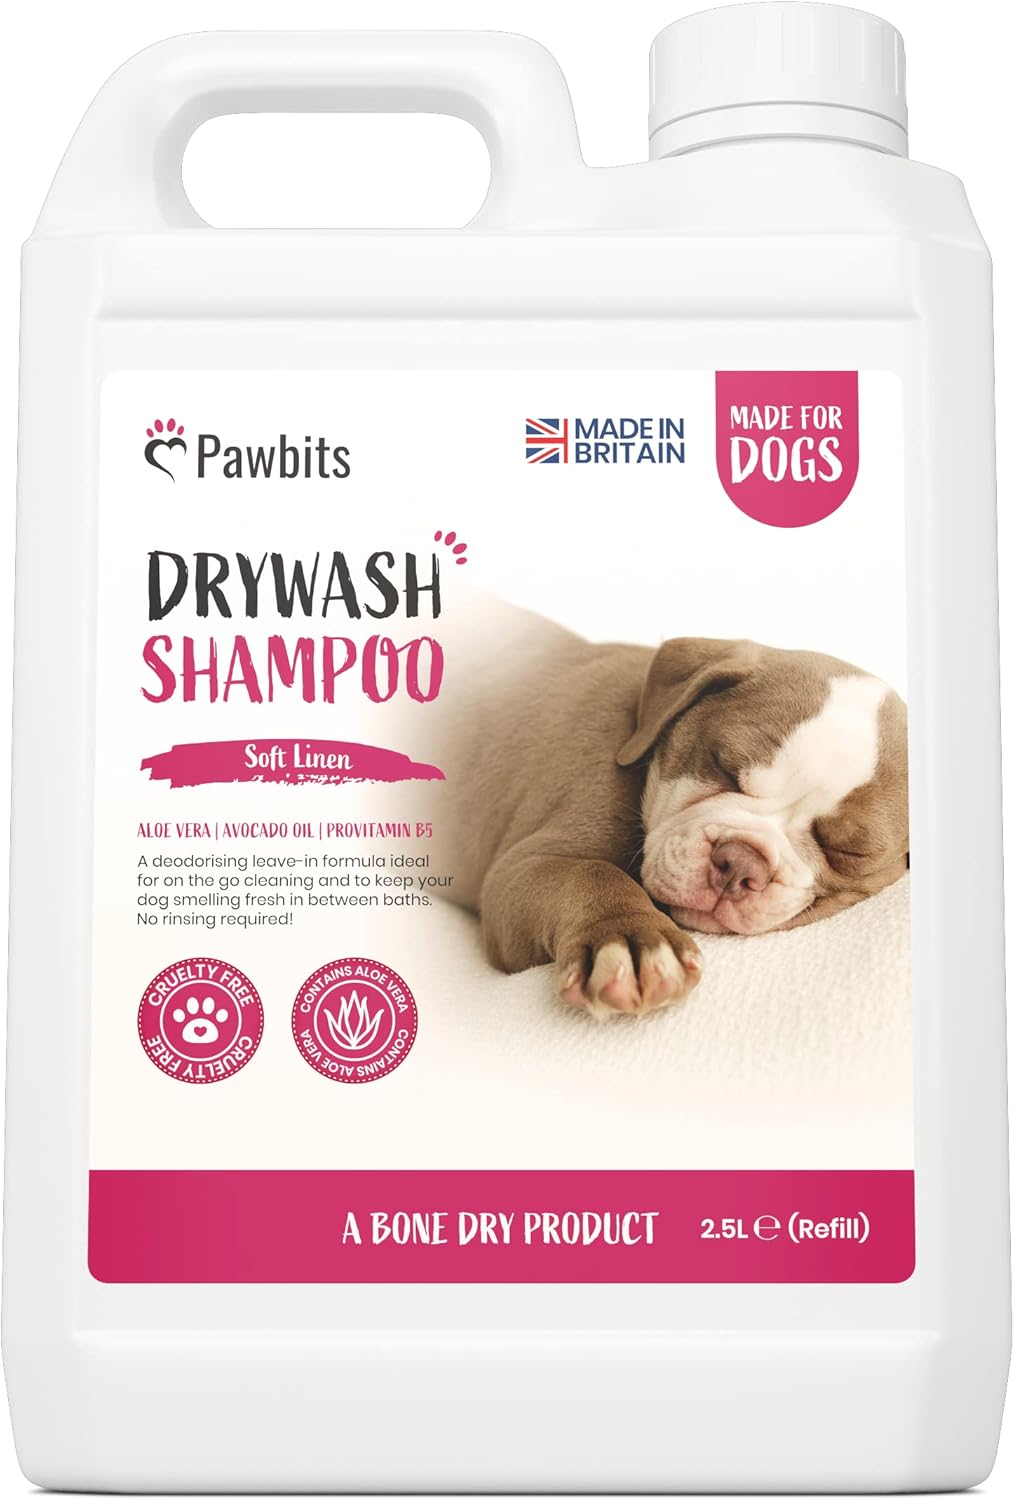 Pawbits Drywash Shampoo for Dogs - Puppy Friendly 3-in-1 Dry Shampoo to Clean, Condition & Detangle – No Water Required (Soft Linen - 2.5L)??PB-DRYWASH